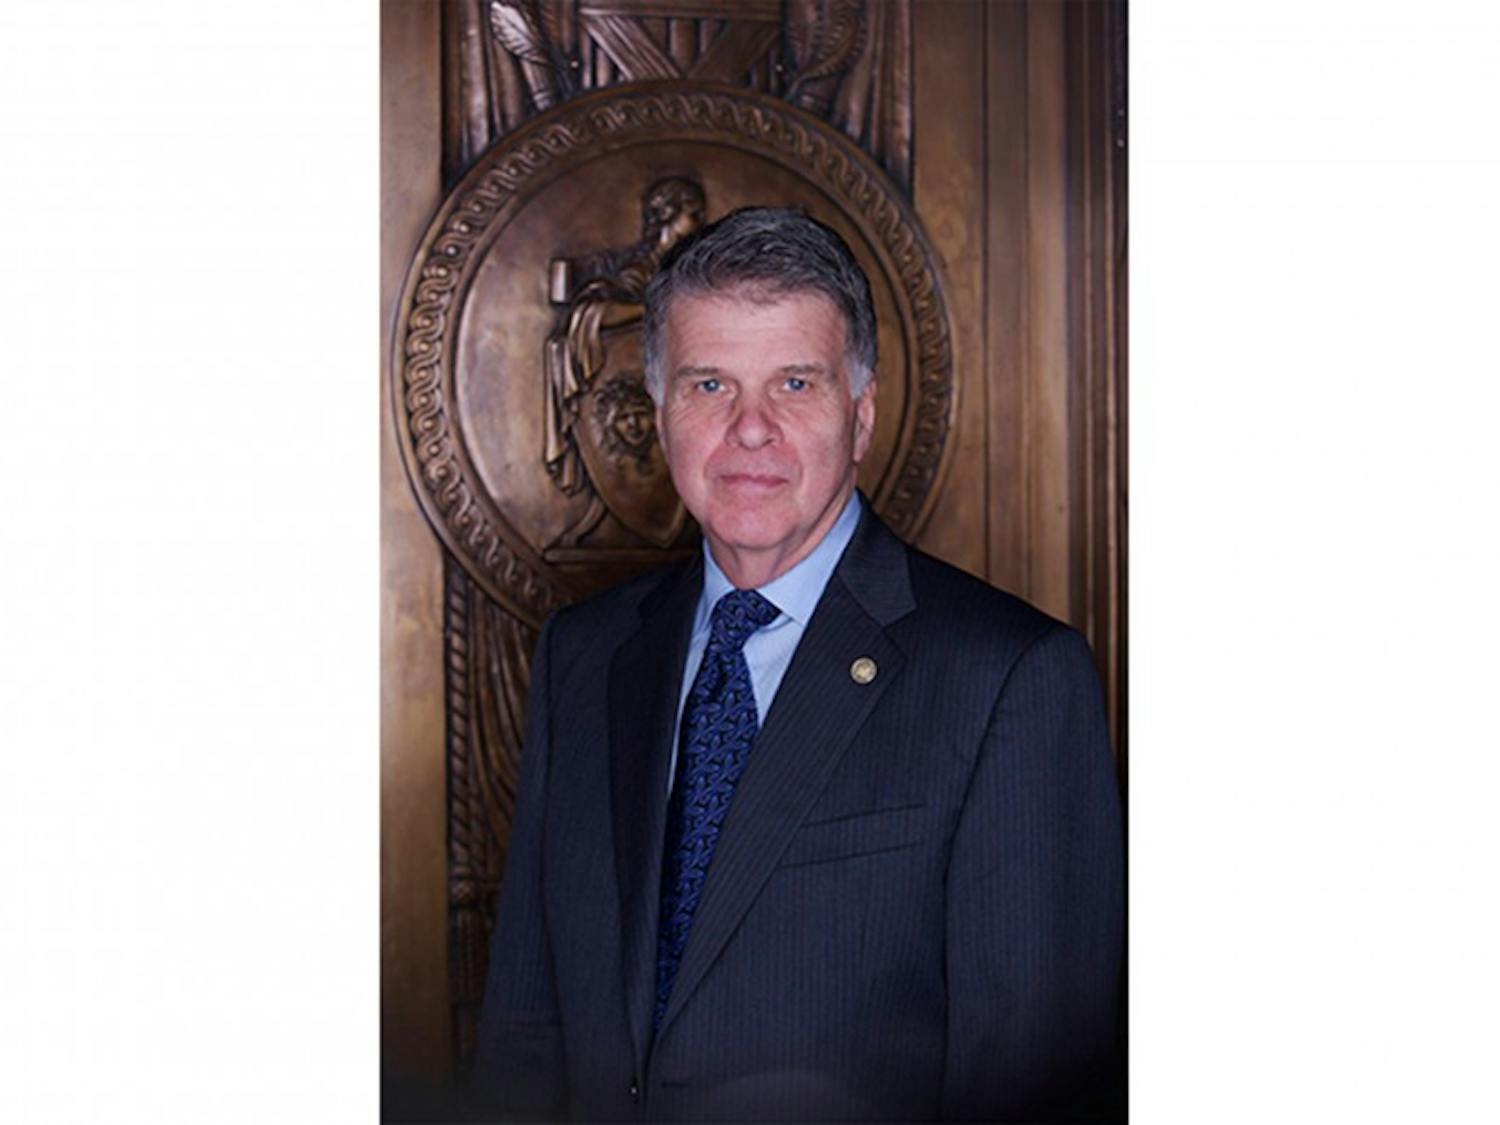 David Ferriero, the 10th Archivist of the U.S., became the first librarian selected for the position in 2009 after previously serving as university librarian at Duke.